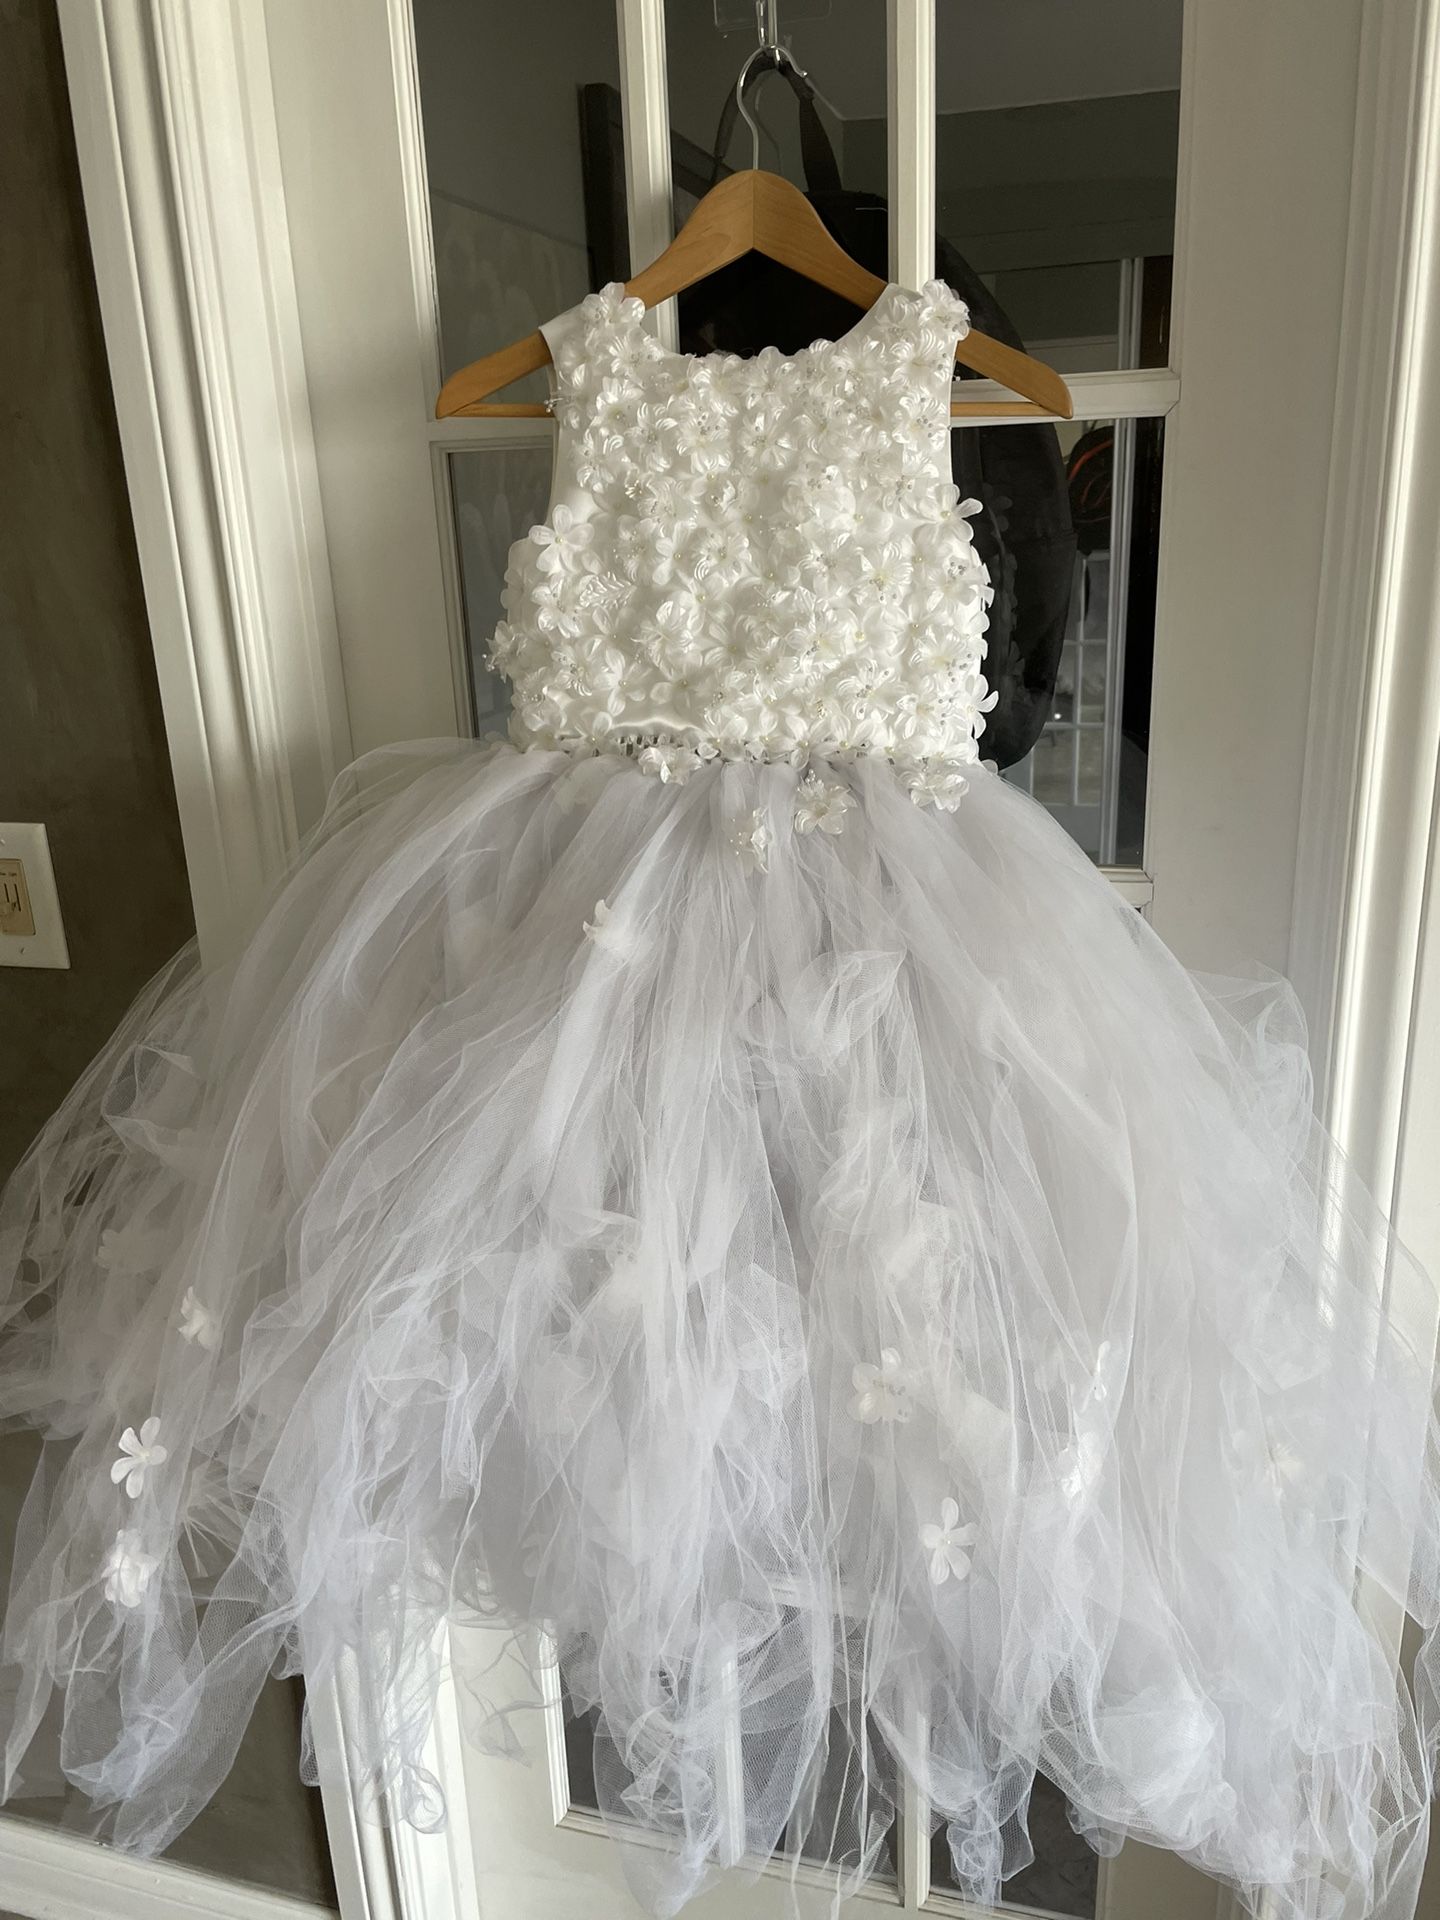 Beautiful White Dress For Flower Girl Or First Communion 